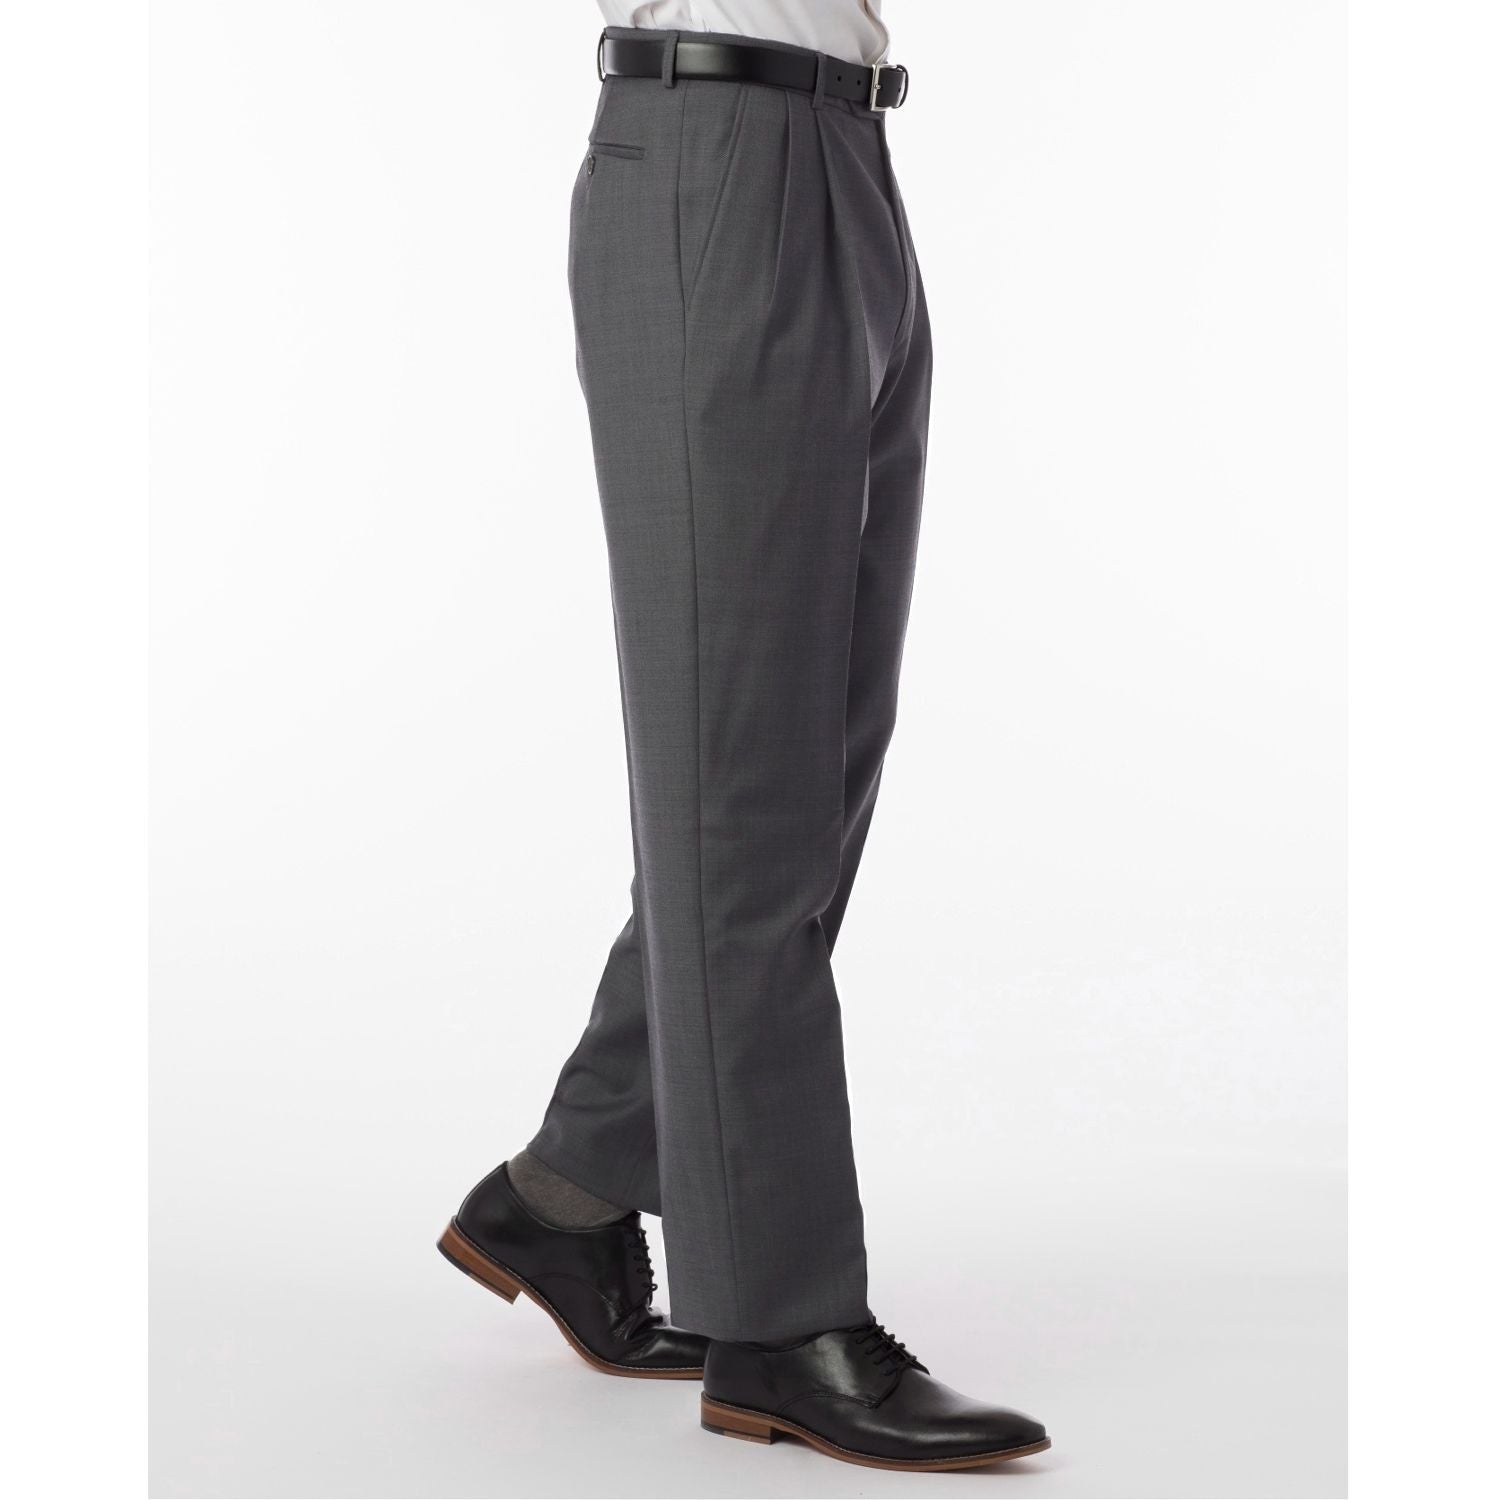 Super 120s Wool Travel Twill Comfort-EZE Trouser in Medium Grey, Size 42 (Manchester Pleated Model) by Ballin